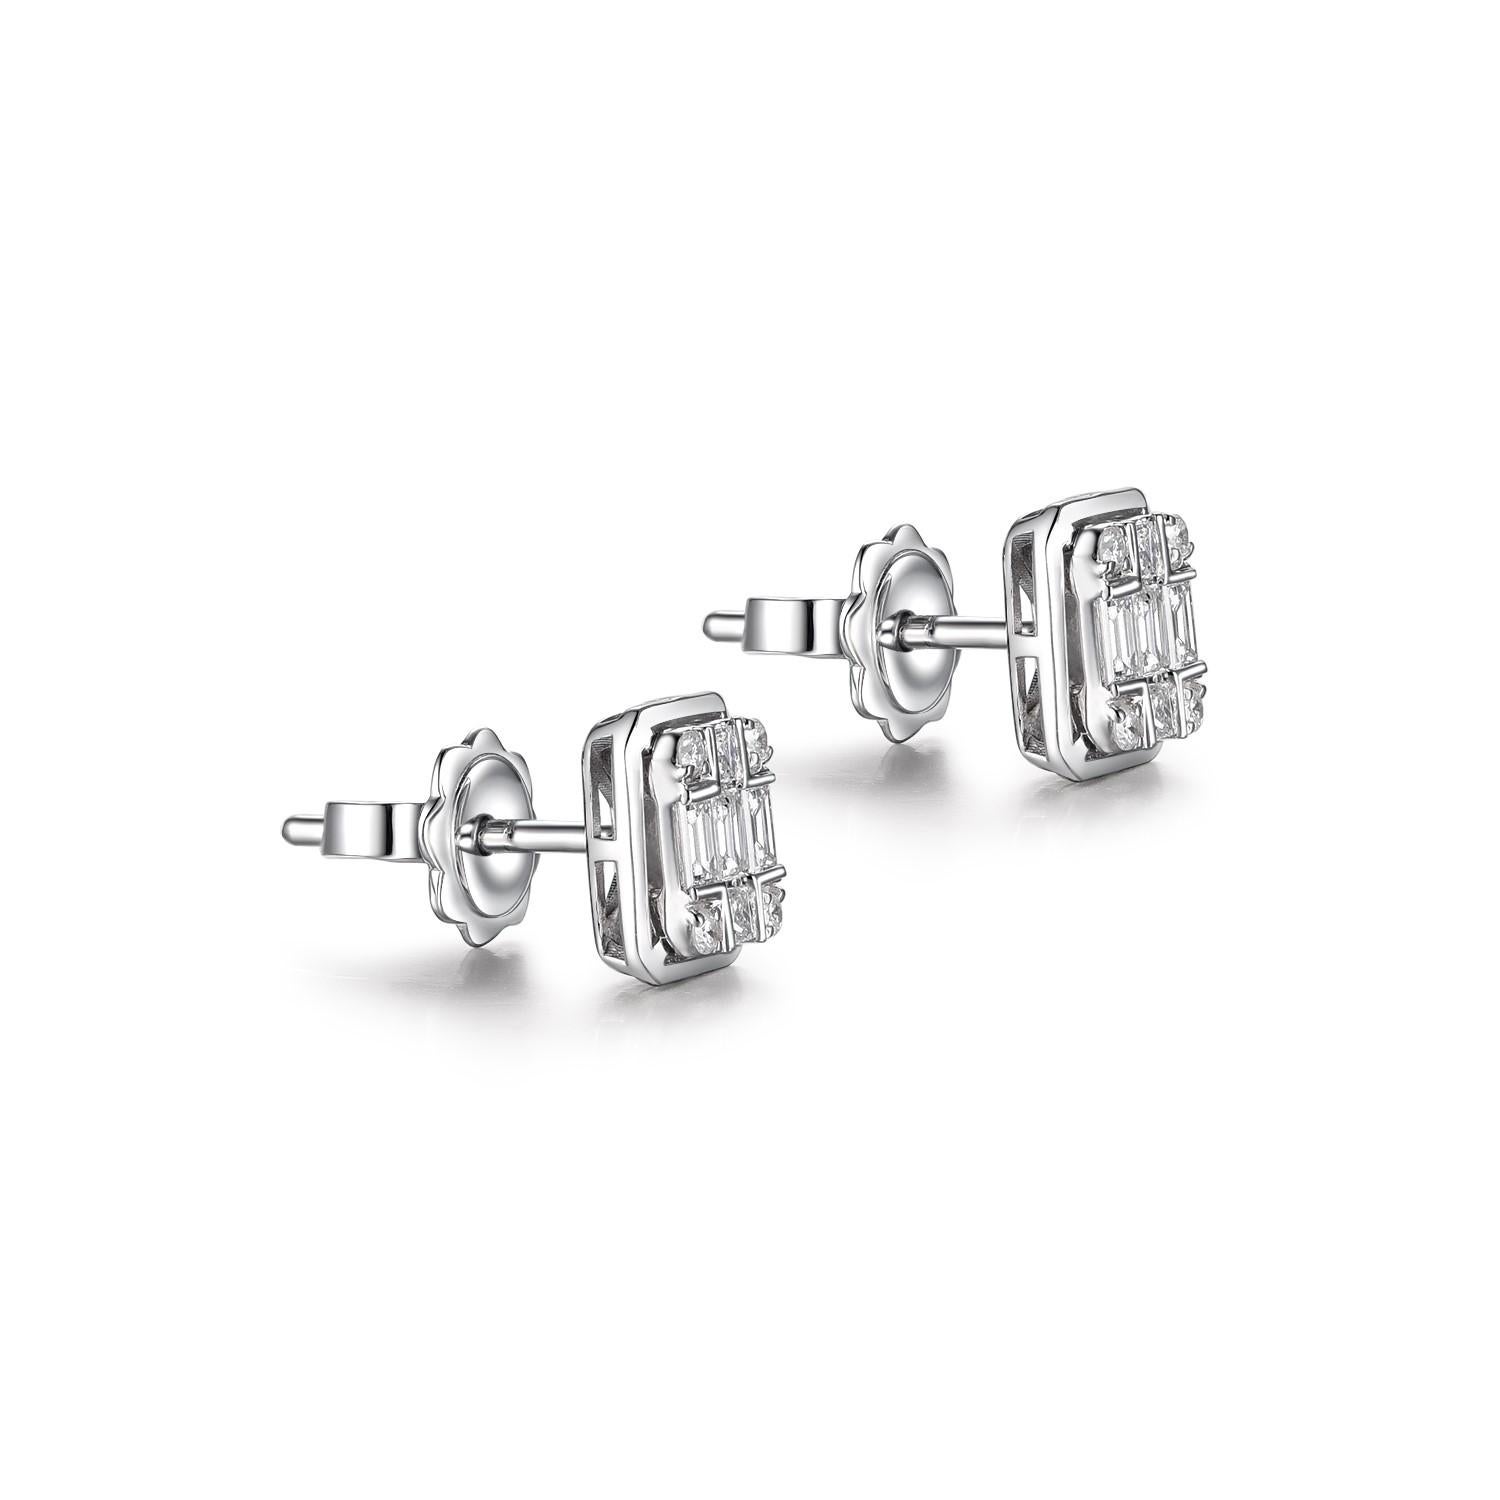 Experience elegance with our stunning stud earrings, featuring 0.34 carats of taper baguette diamonds, paired beautifully with 0.06 carats of sparkling round diamonds. The geometric allure of the baguettes, combined with the classic brilliance of